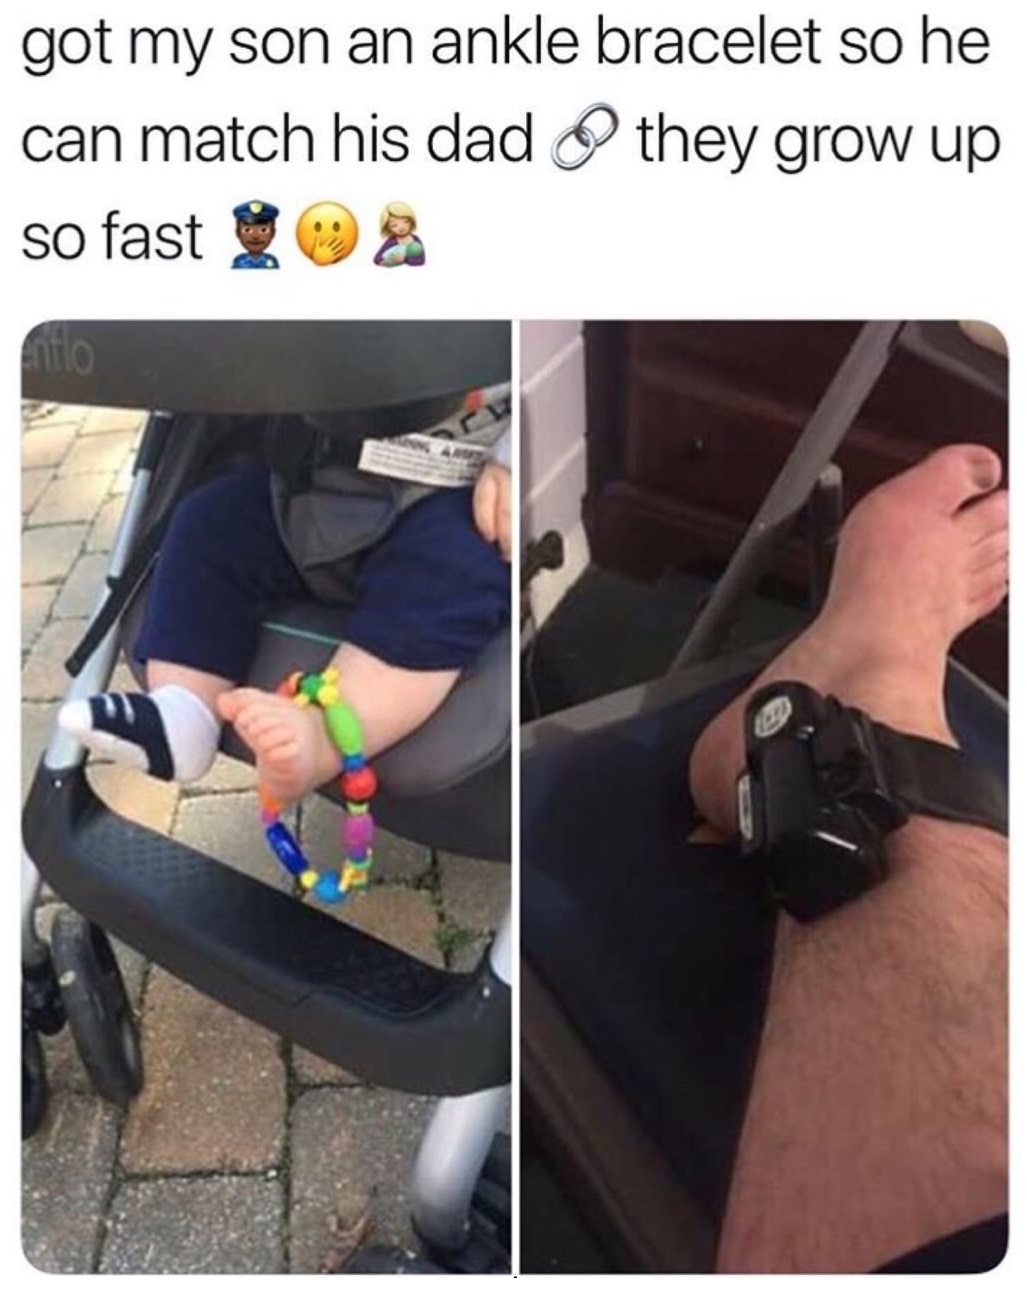 funny ankle monitor memes - got my son an ankle bracelet so he can match his dad they grow up so fast 308